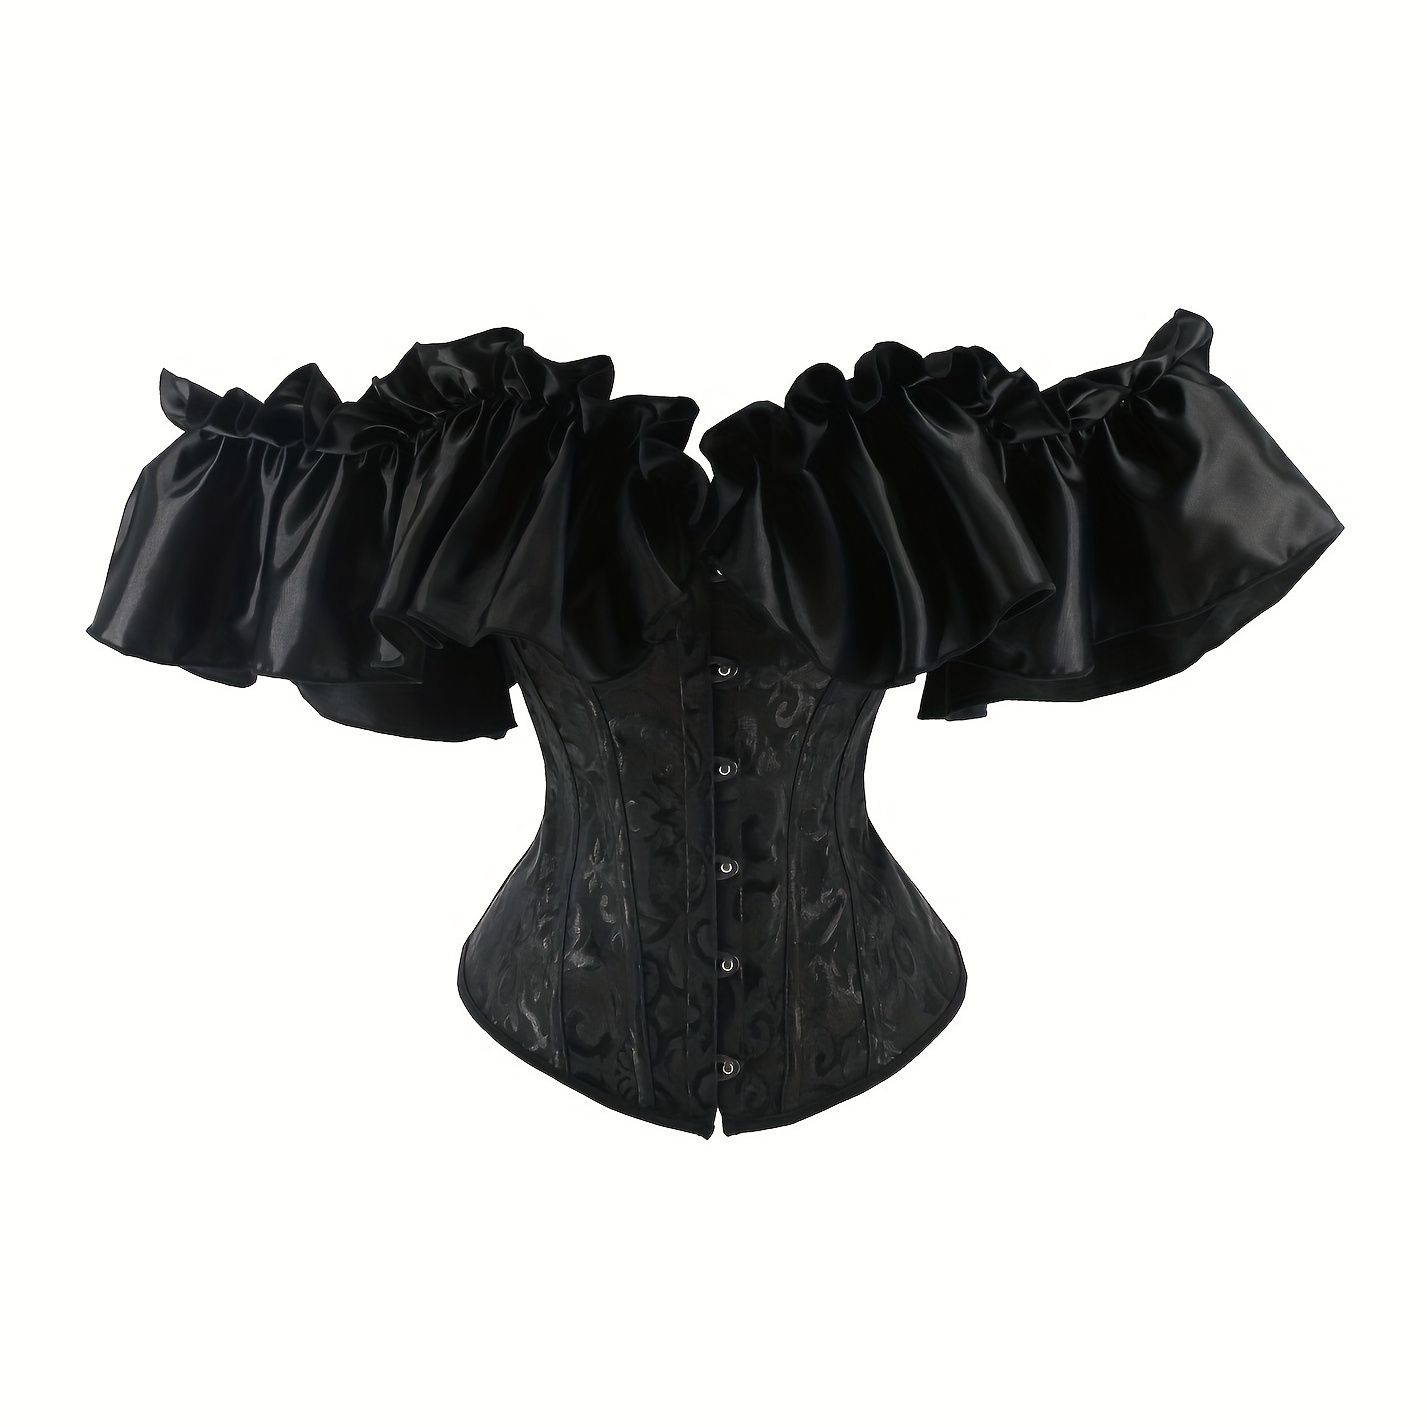 

Off-shoulder Lace Up Corset Top, Stylish Ruffle Trim Bodice Top, Women's Clothing